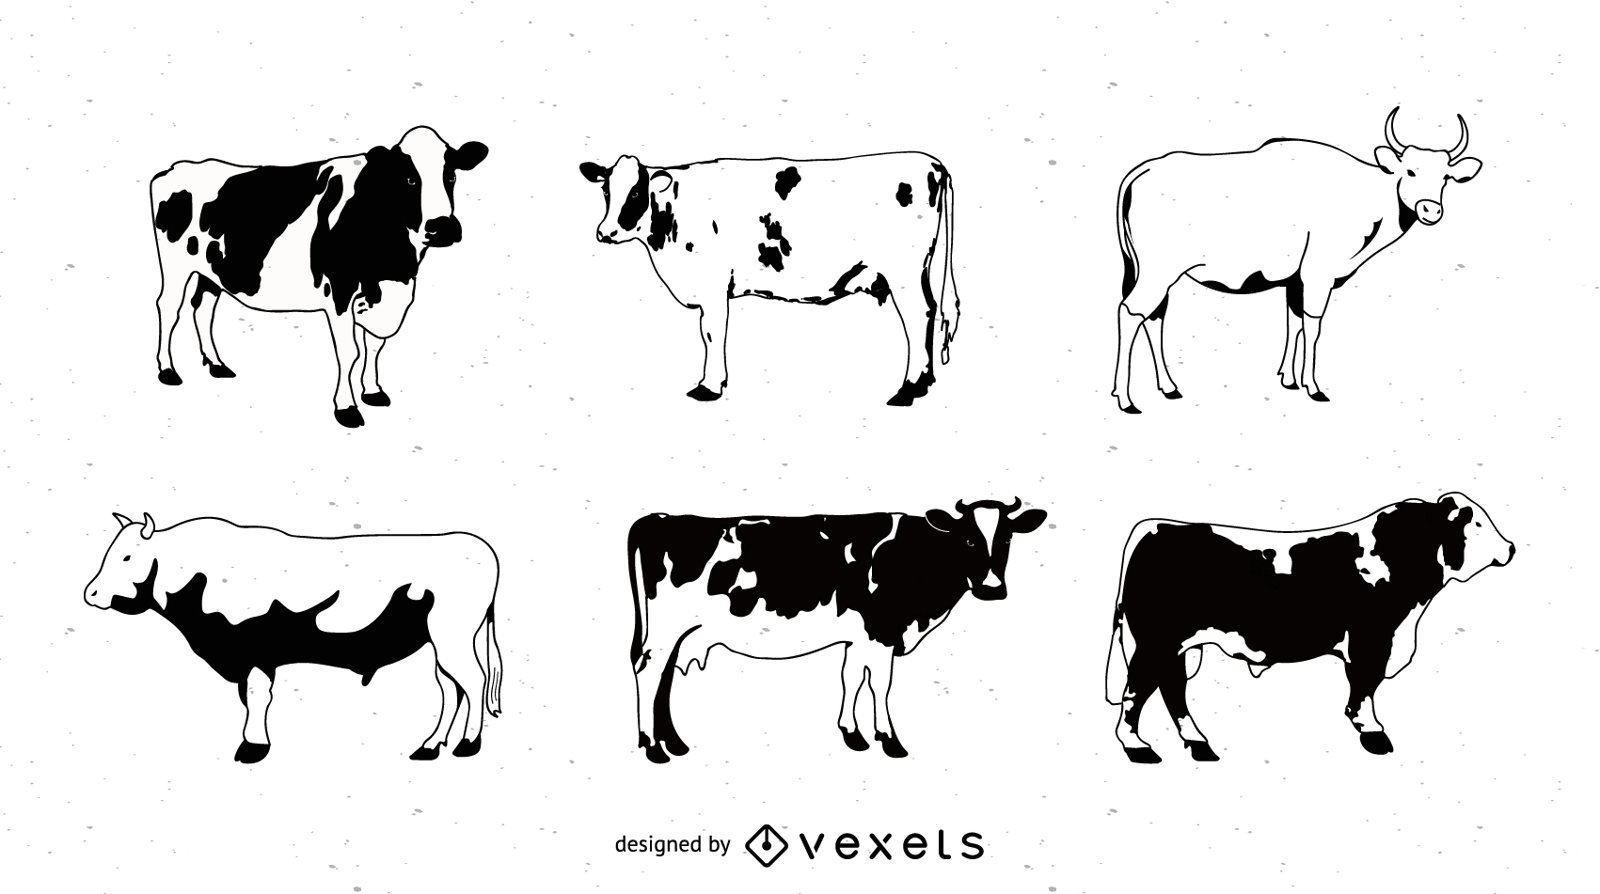 Black And White Picture Series Of A Painted Cow Vector Vector